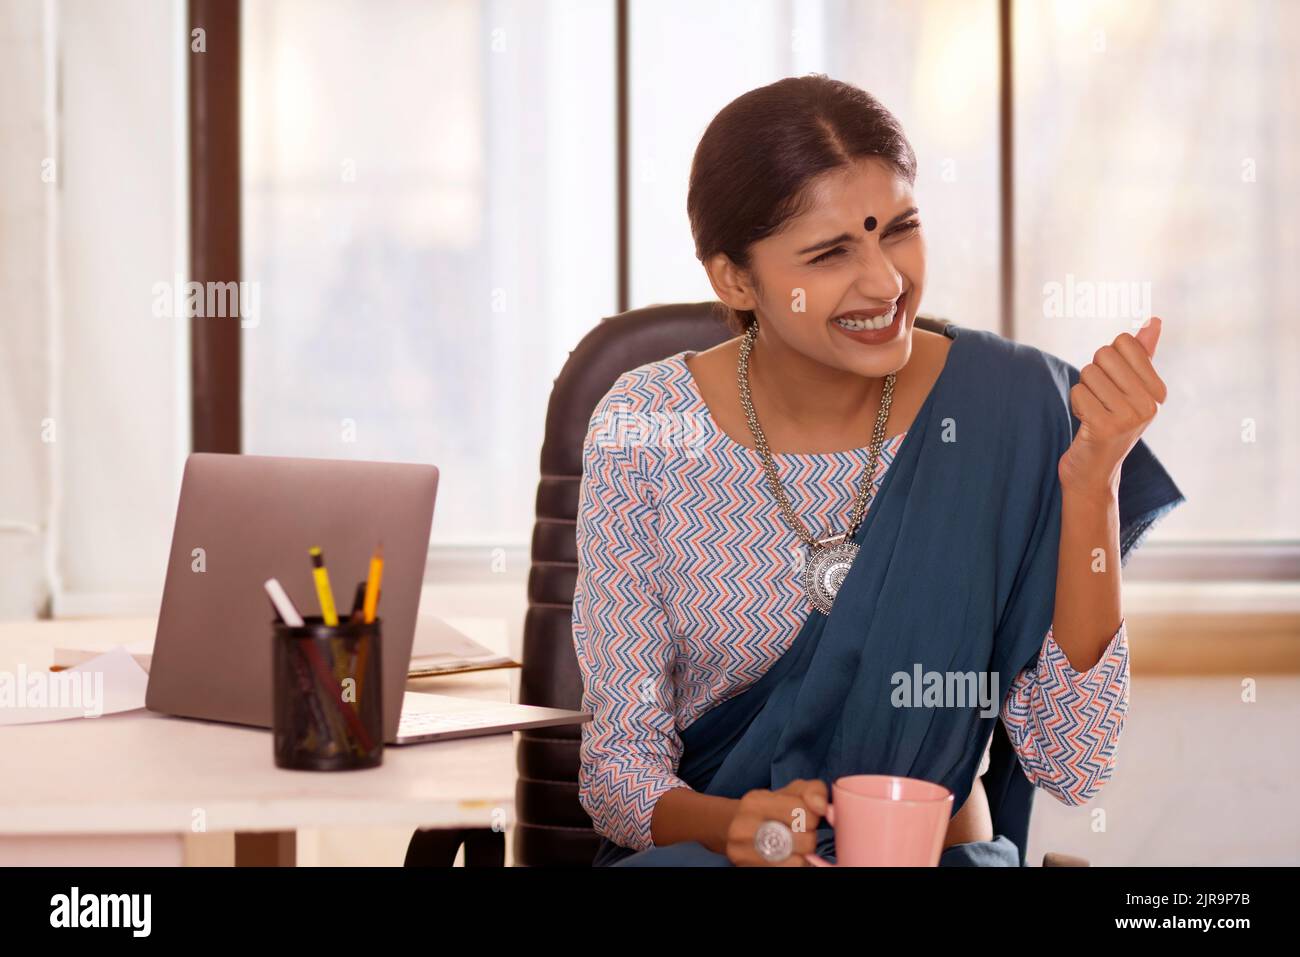 Portrait of happy woman cheering in office Stock Photo